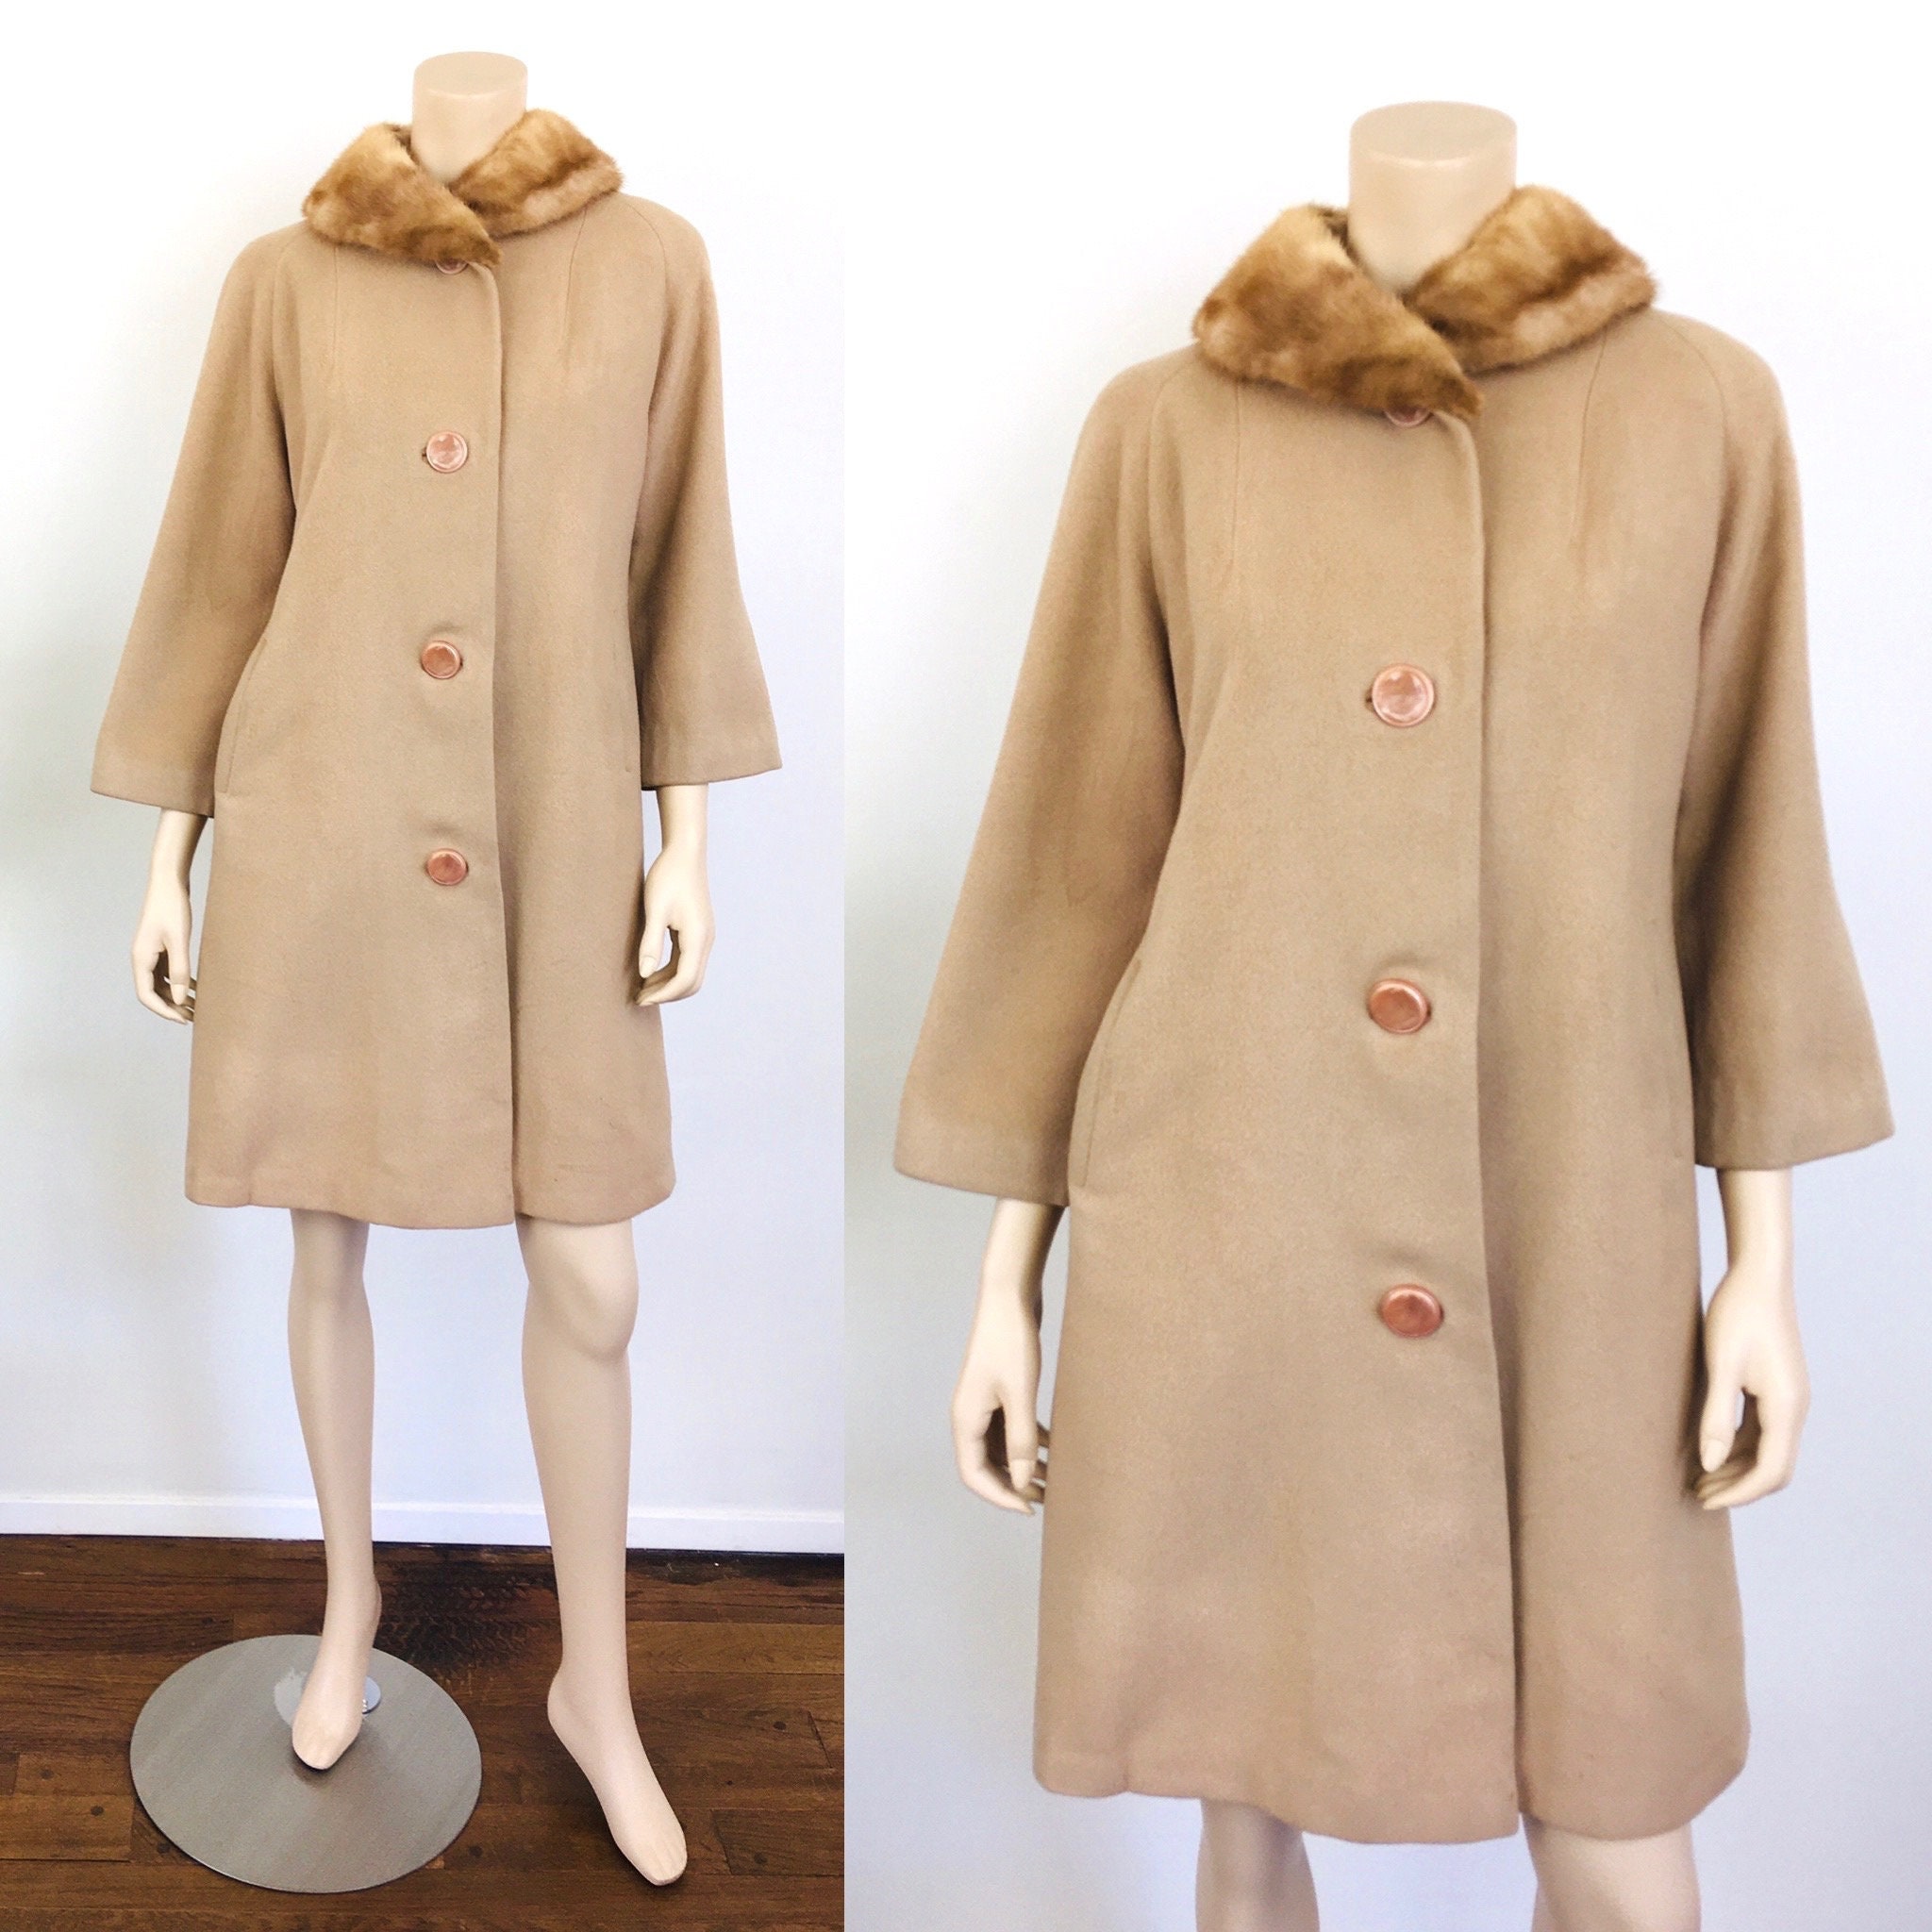 60s Thomas Coat - Pink Wool Cashmere - Emerson Fry